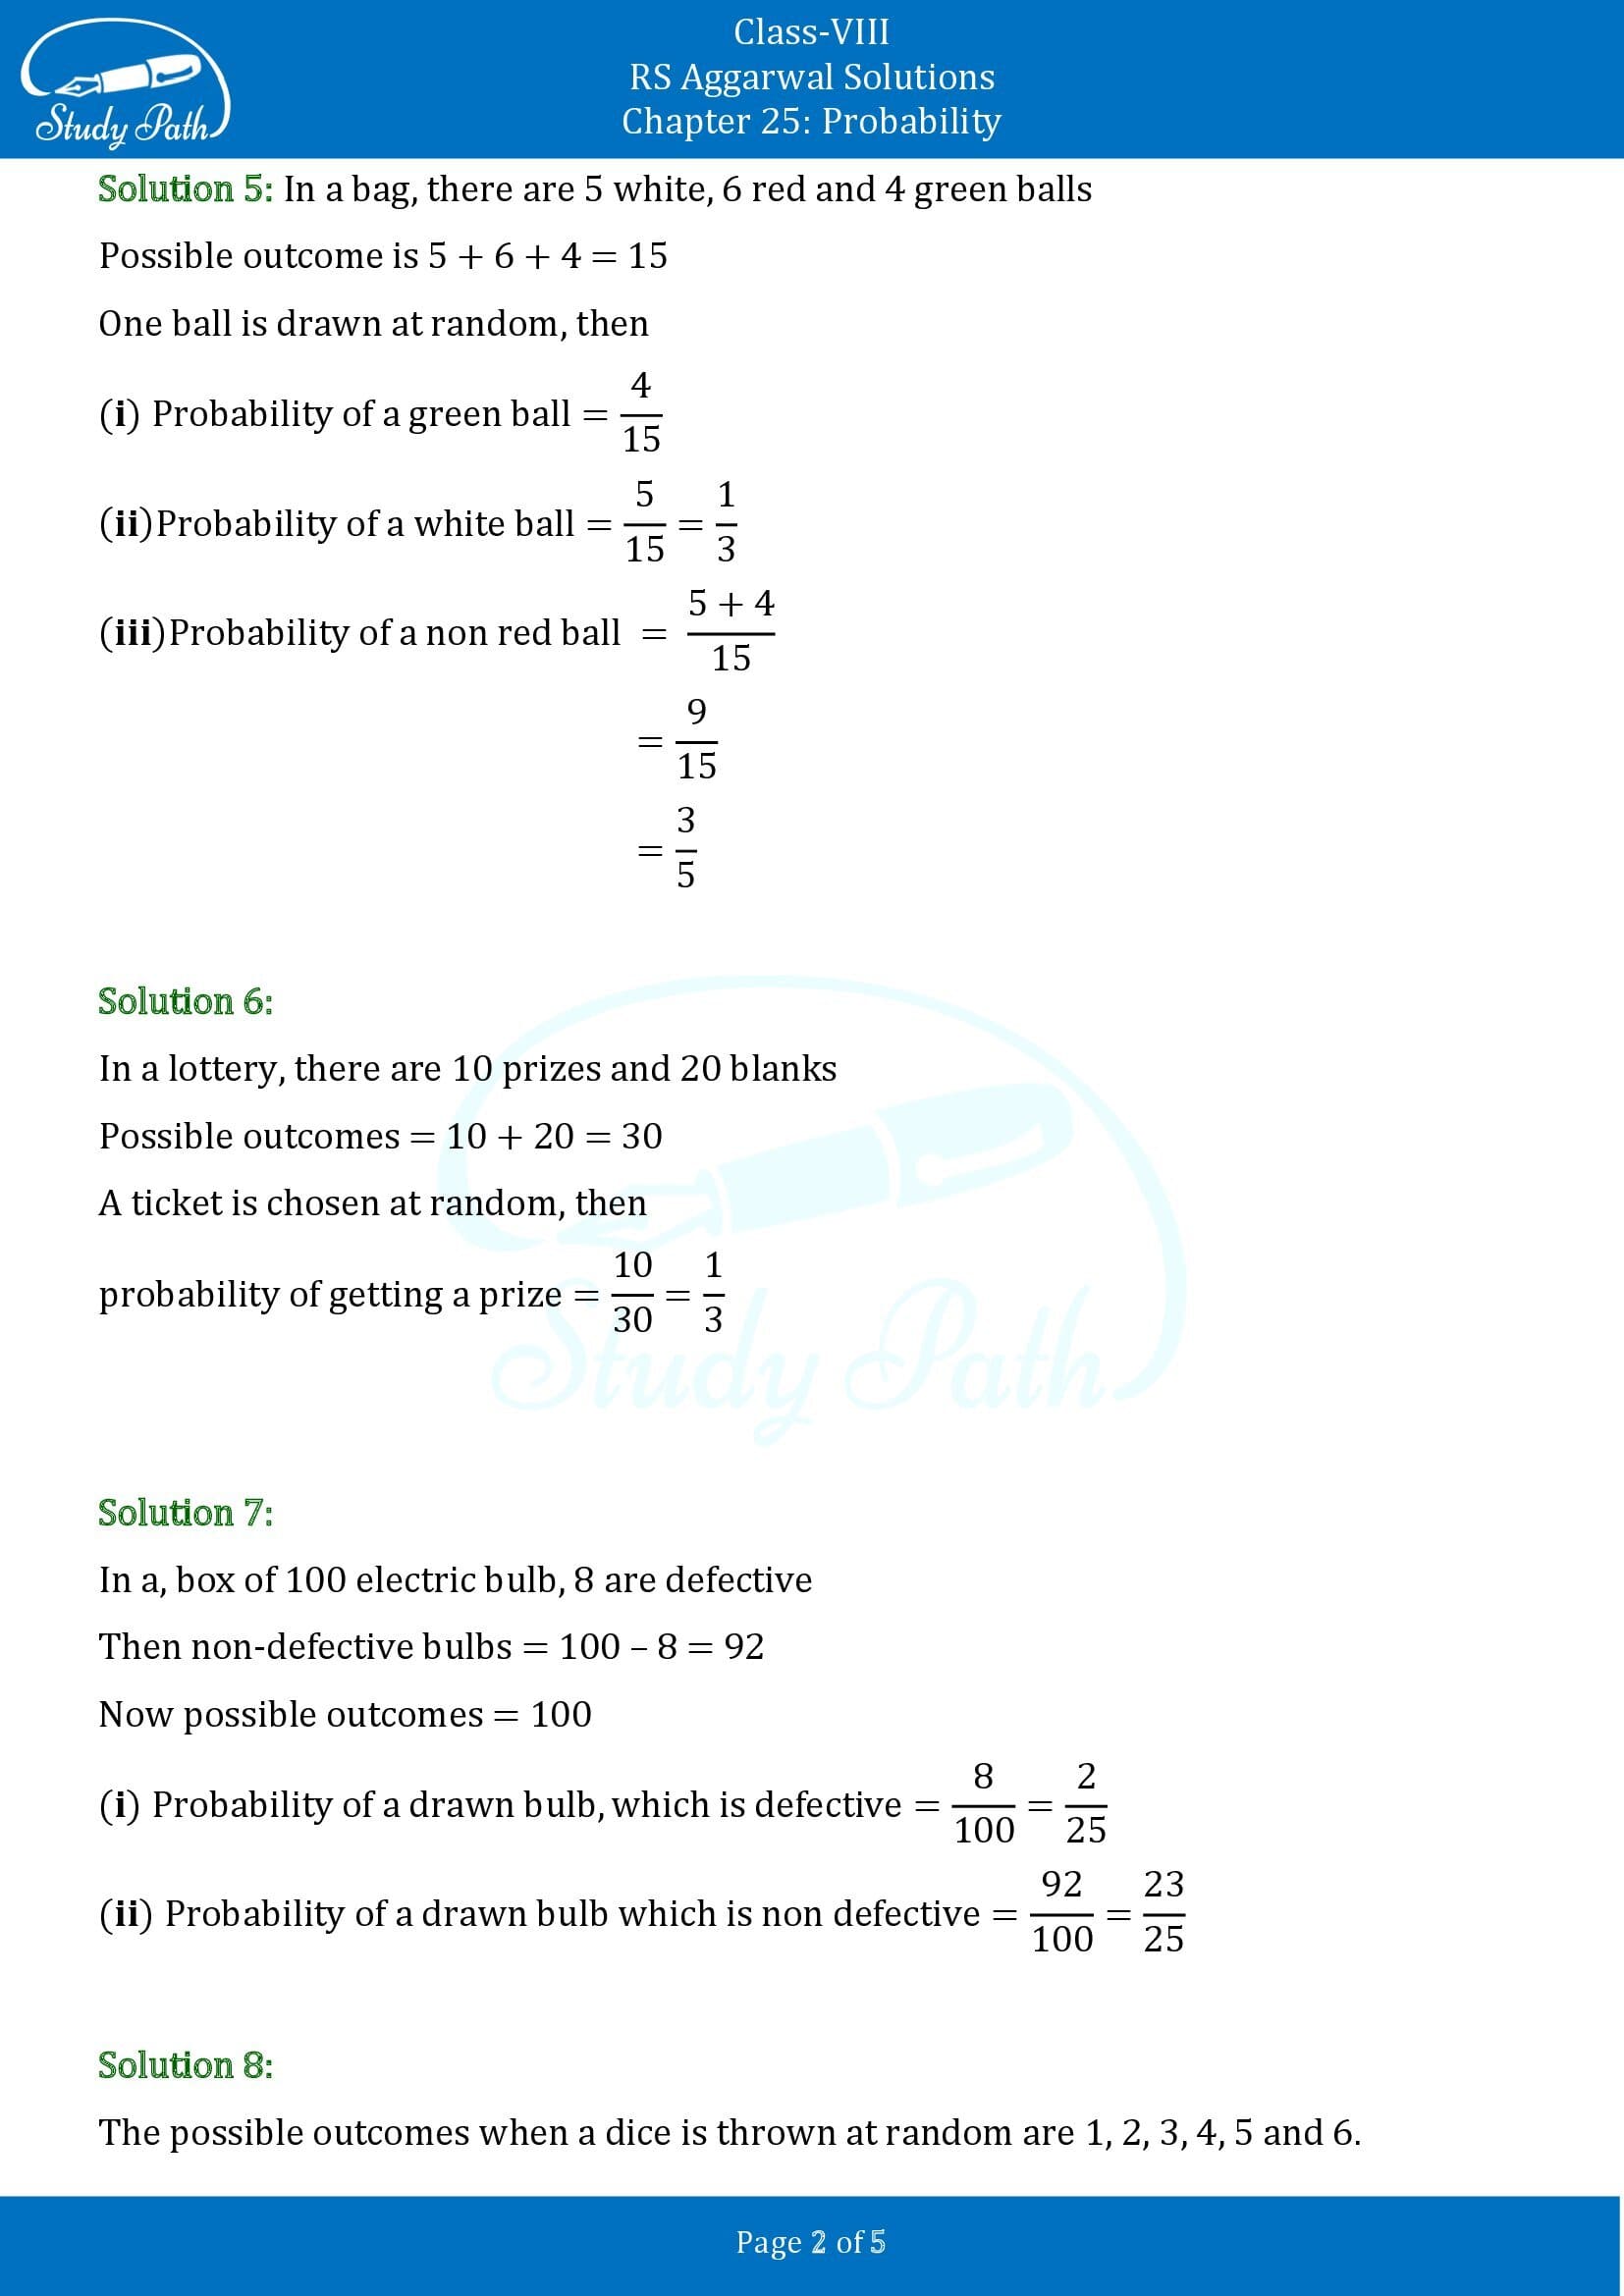 RS Aggarwal Solutions Class 8 Chapter 25 Probability Exercise 25A 00002